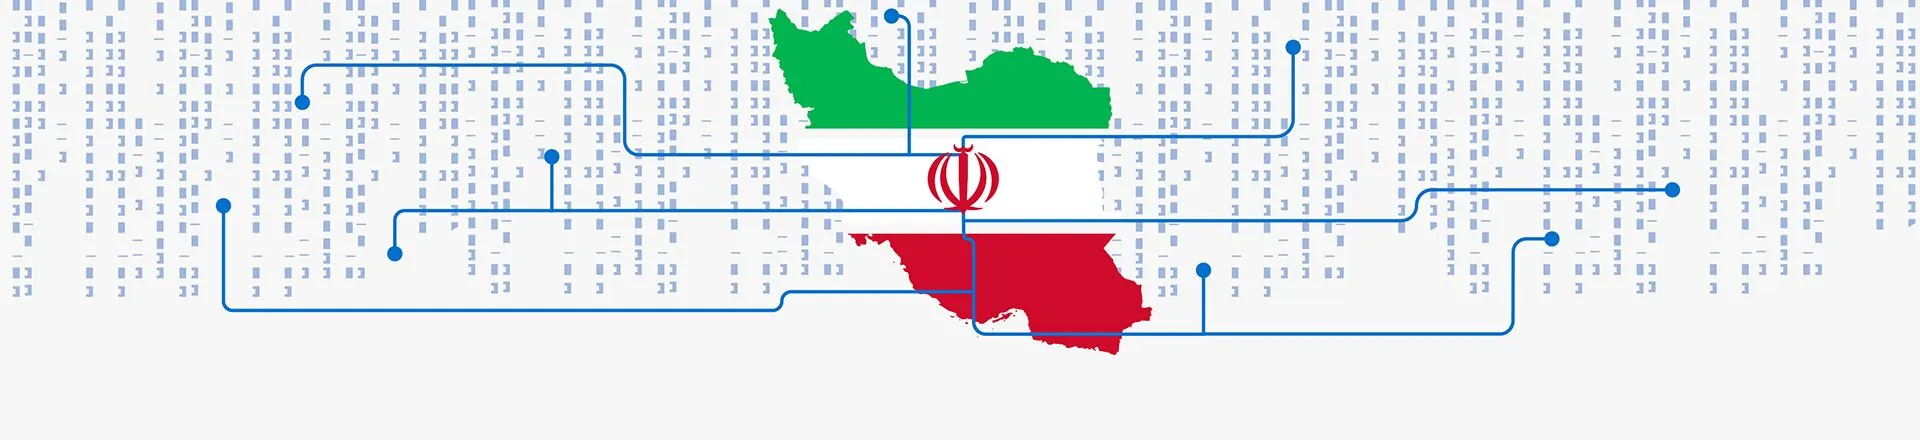 Iranian Cyber Response to Death of IRGC Head Would Likely Use Reported TTPs and Previous Access